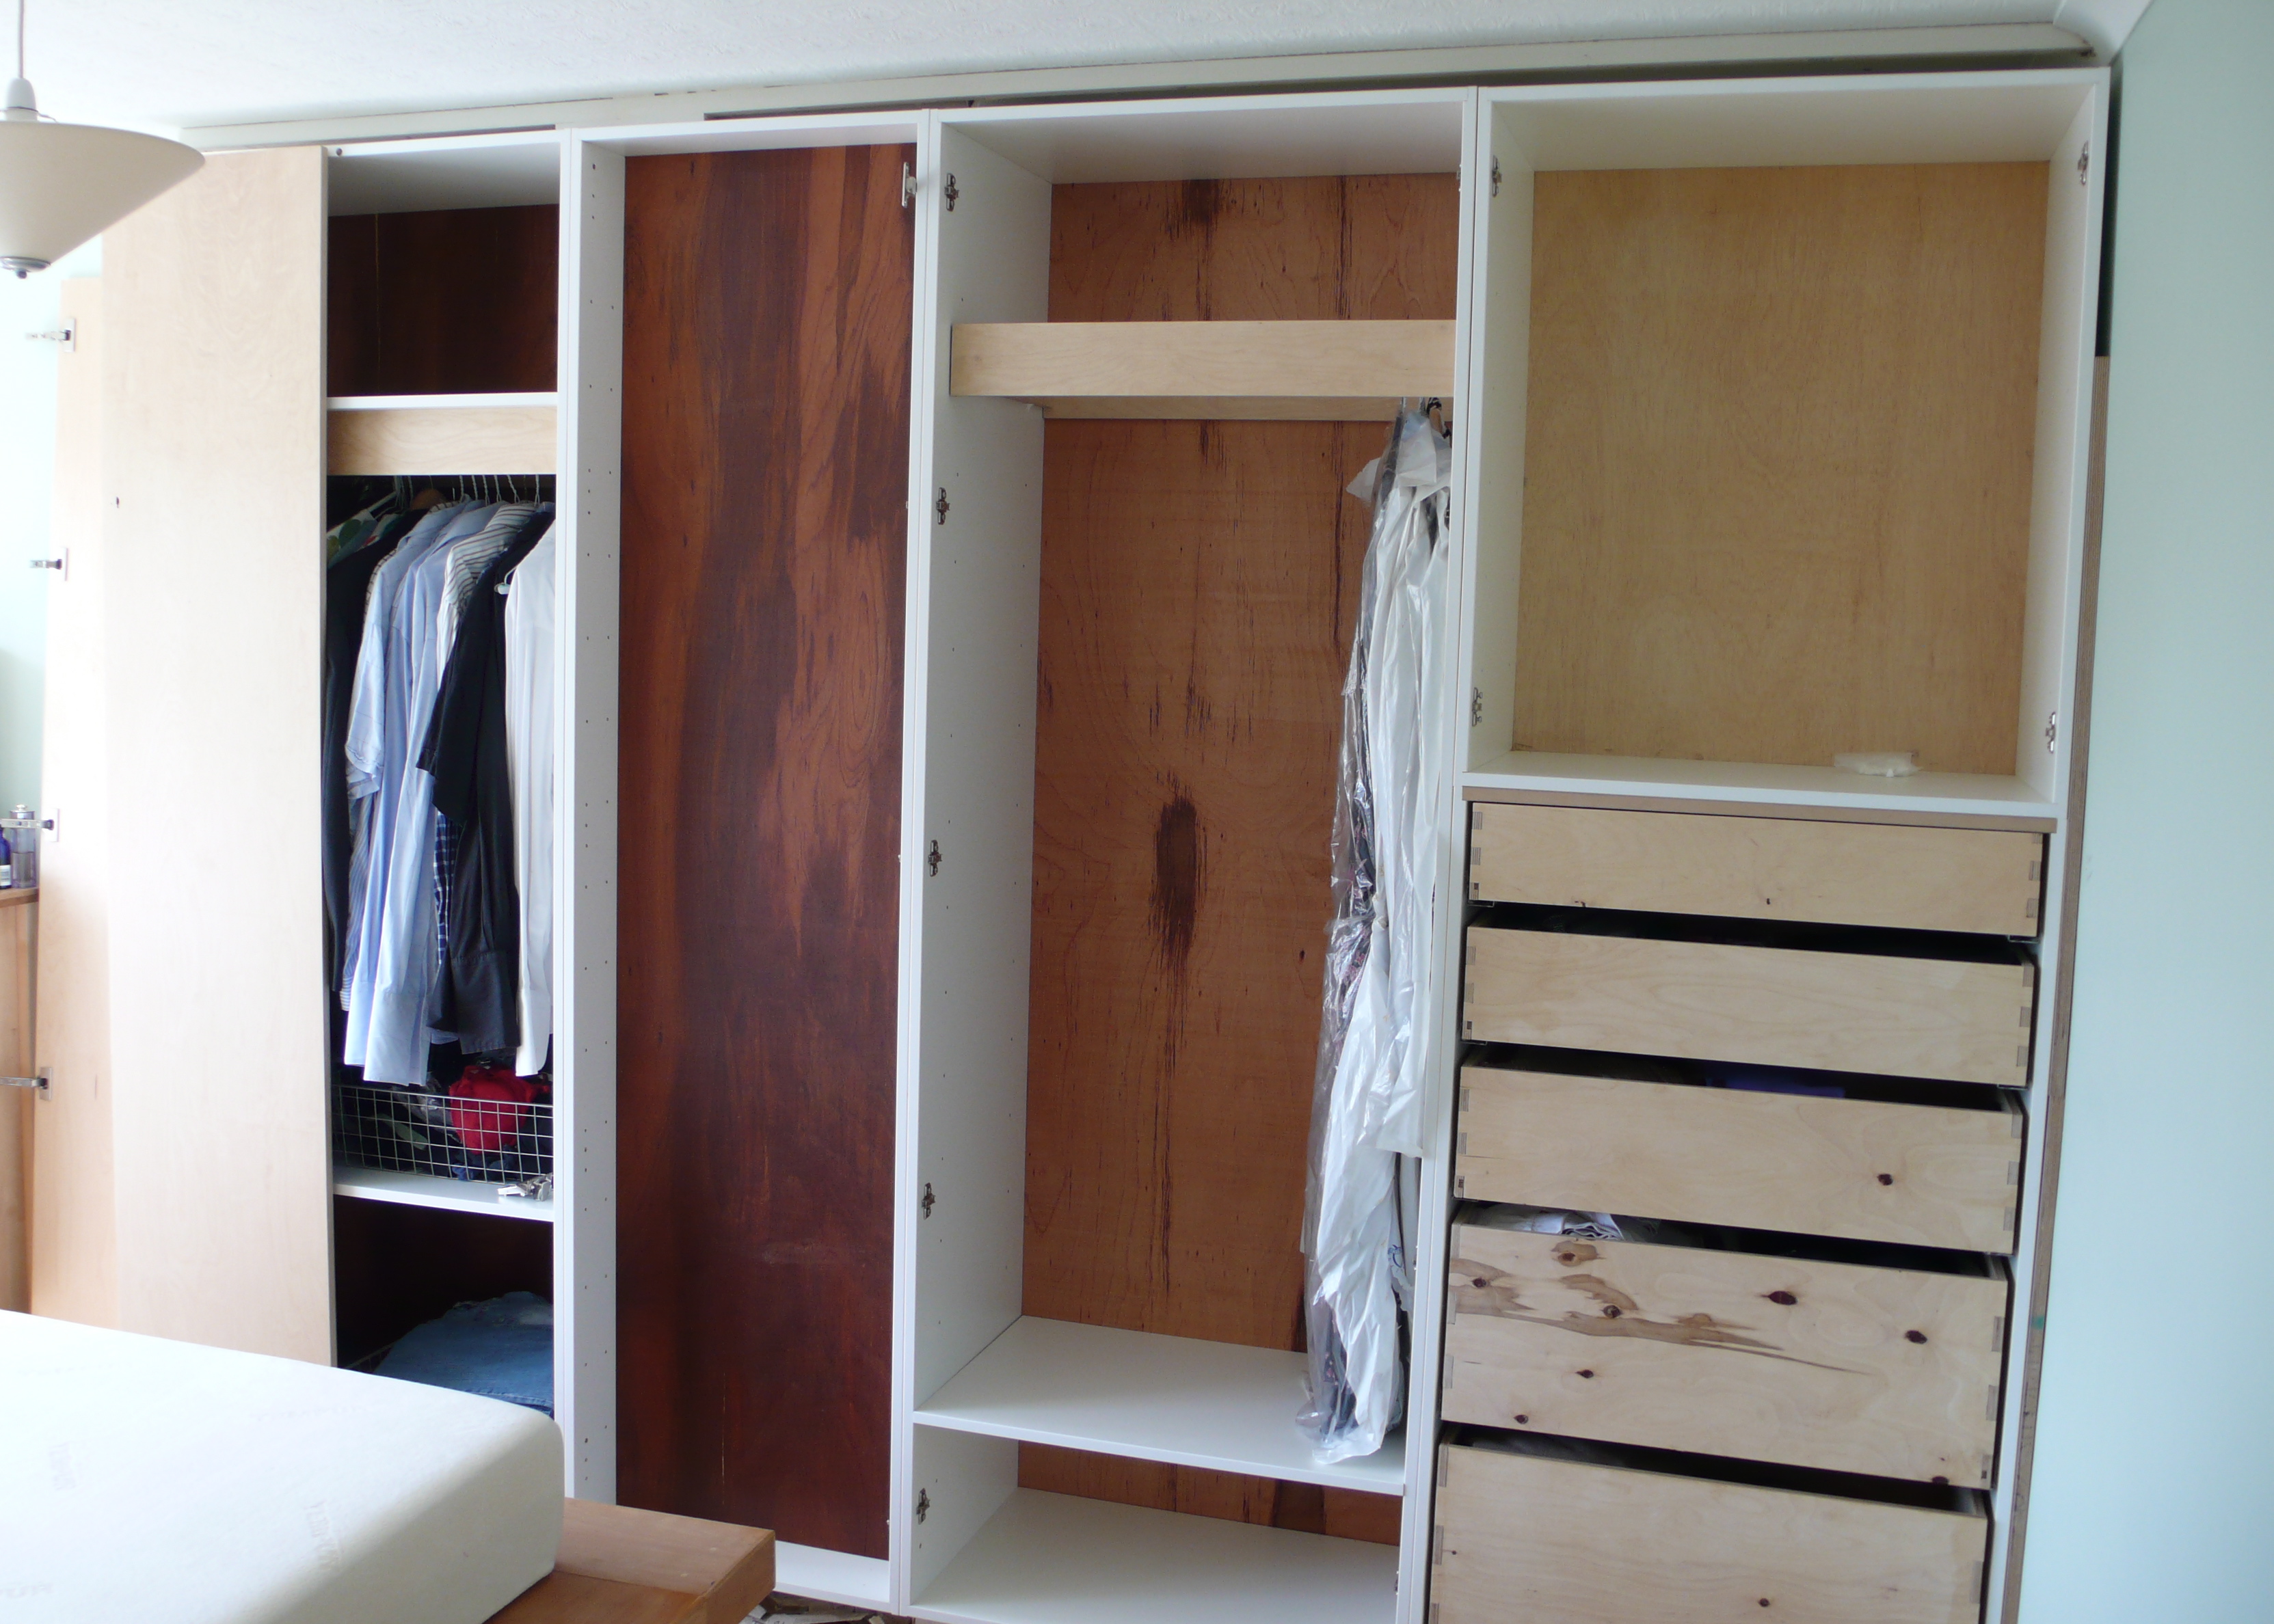 A shallow wardrobe (150mm deep) covers the chimney breast